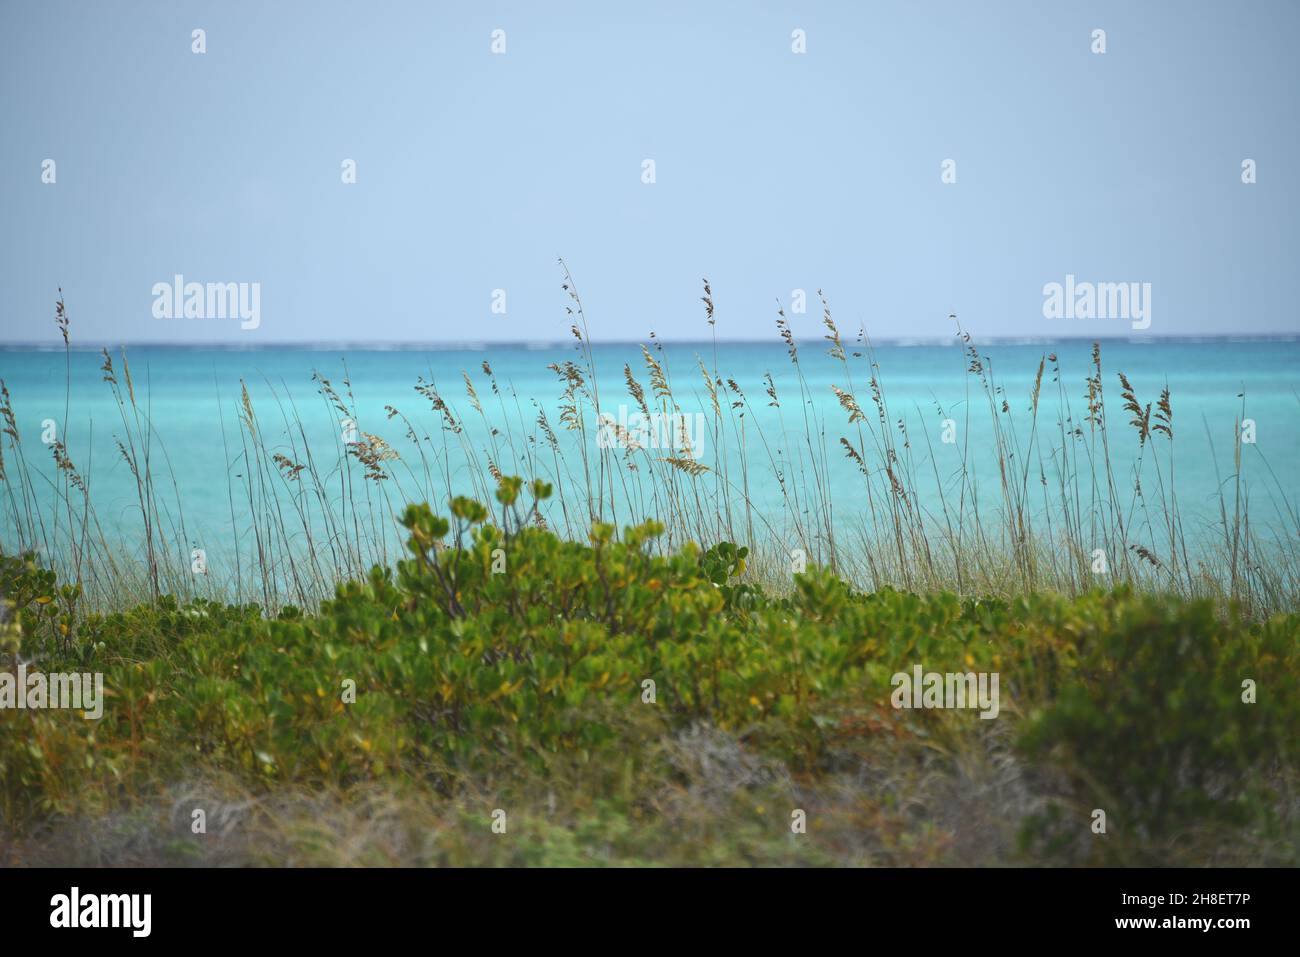 Sea Oats and tropical vegetation creates a lovely foreground contrast to the beautiful turquoise sea and blue sky on the coast of remote Mayaguana. Stock Photo